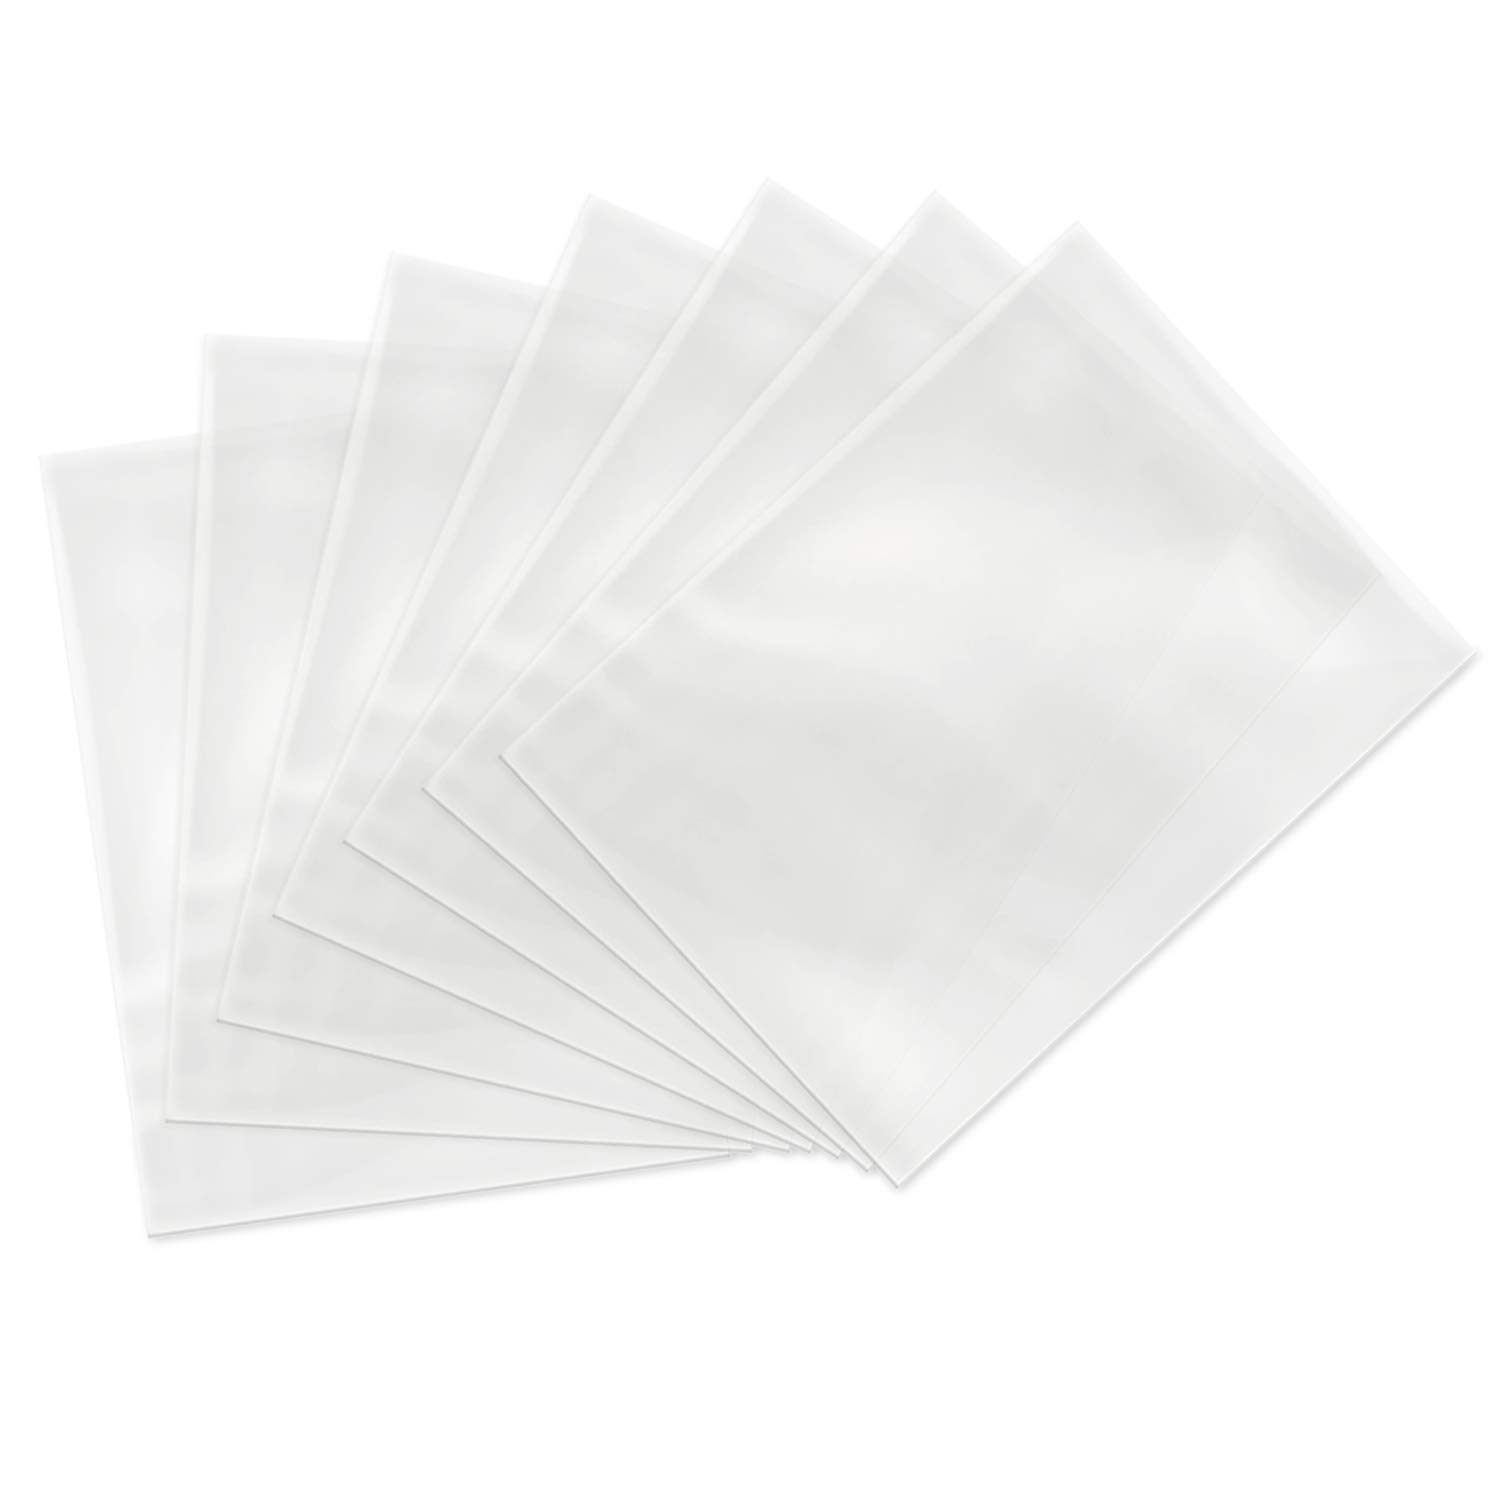 Book Cover Metronic Shrink Wrap Bags 4x6 Inches 500Pcs, Clear PVC Heat Shrink Wrap Bags for Small Business,Books, Shoes,Makeup, Candles,Small Gifts,Jars,Homemade DIY,Cookie Clear 4x6